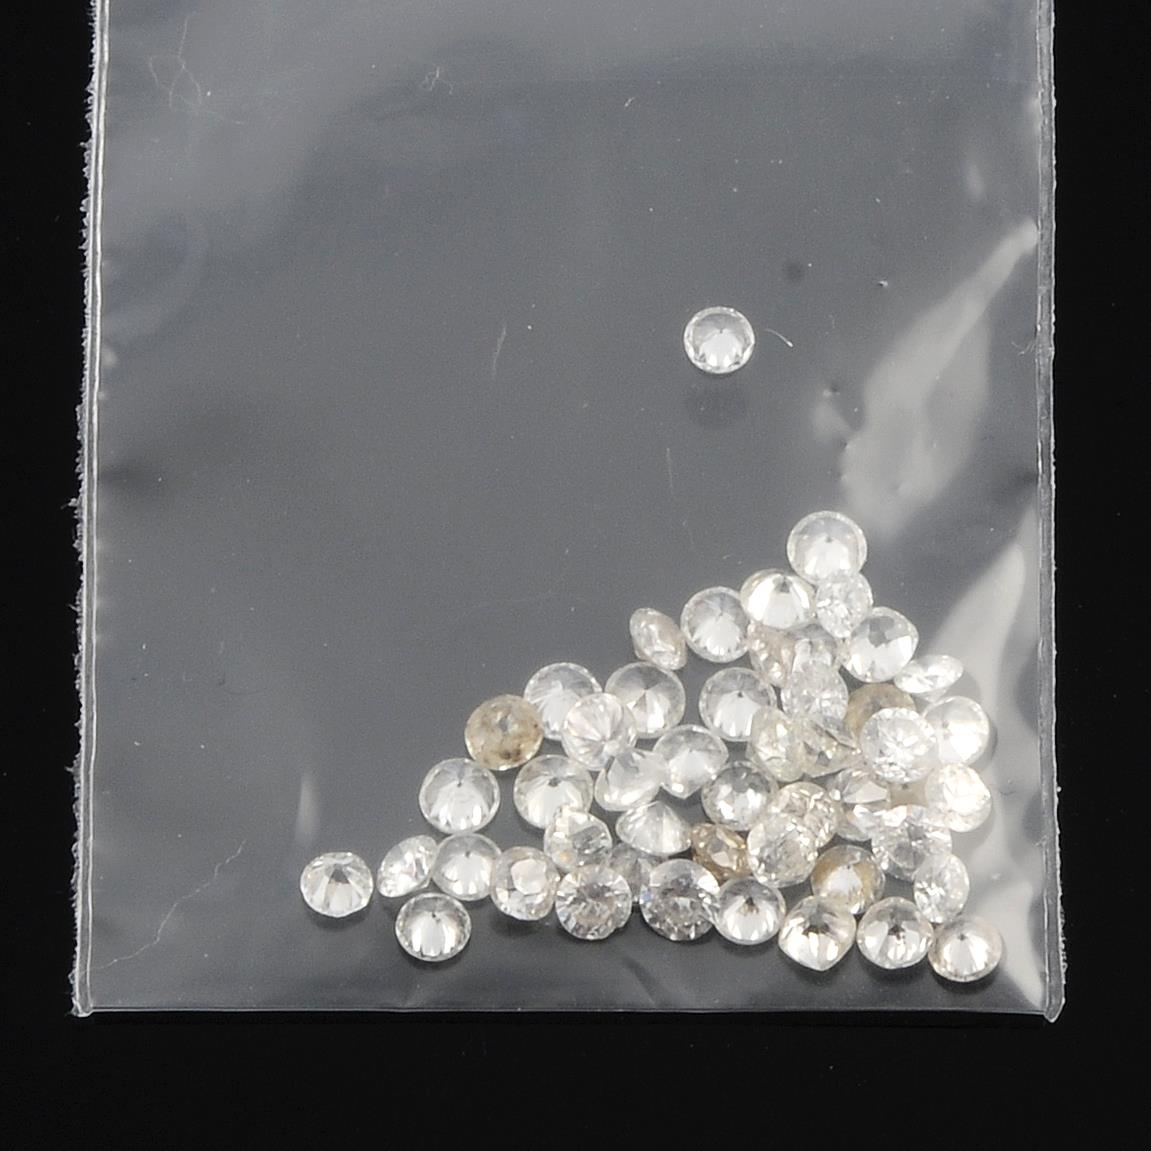 Selection of brilliant cut diamonds, weighing 4.73ct. - Image 2 of 3